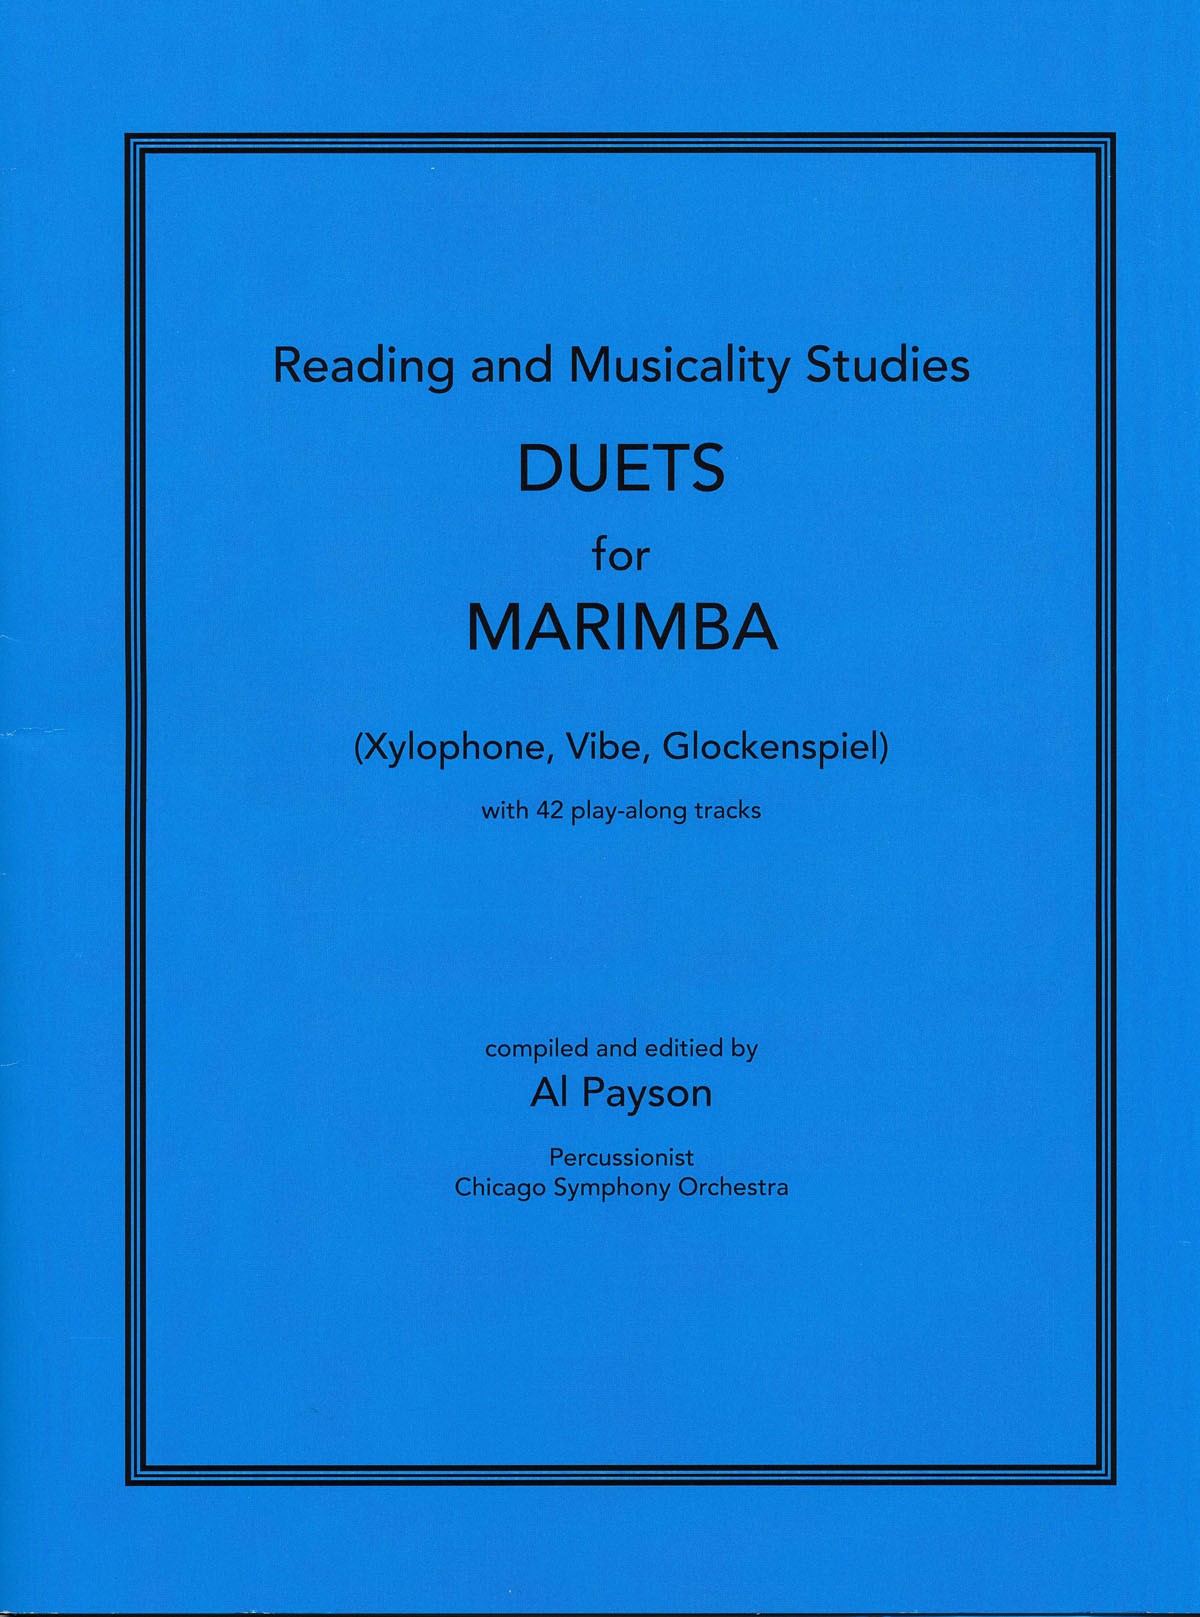 Duets for Marimba by Al Payson